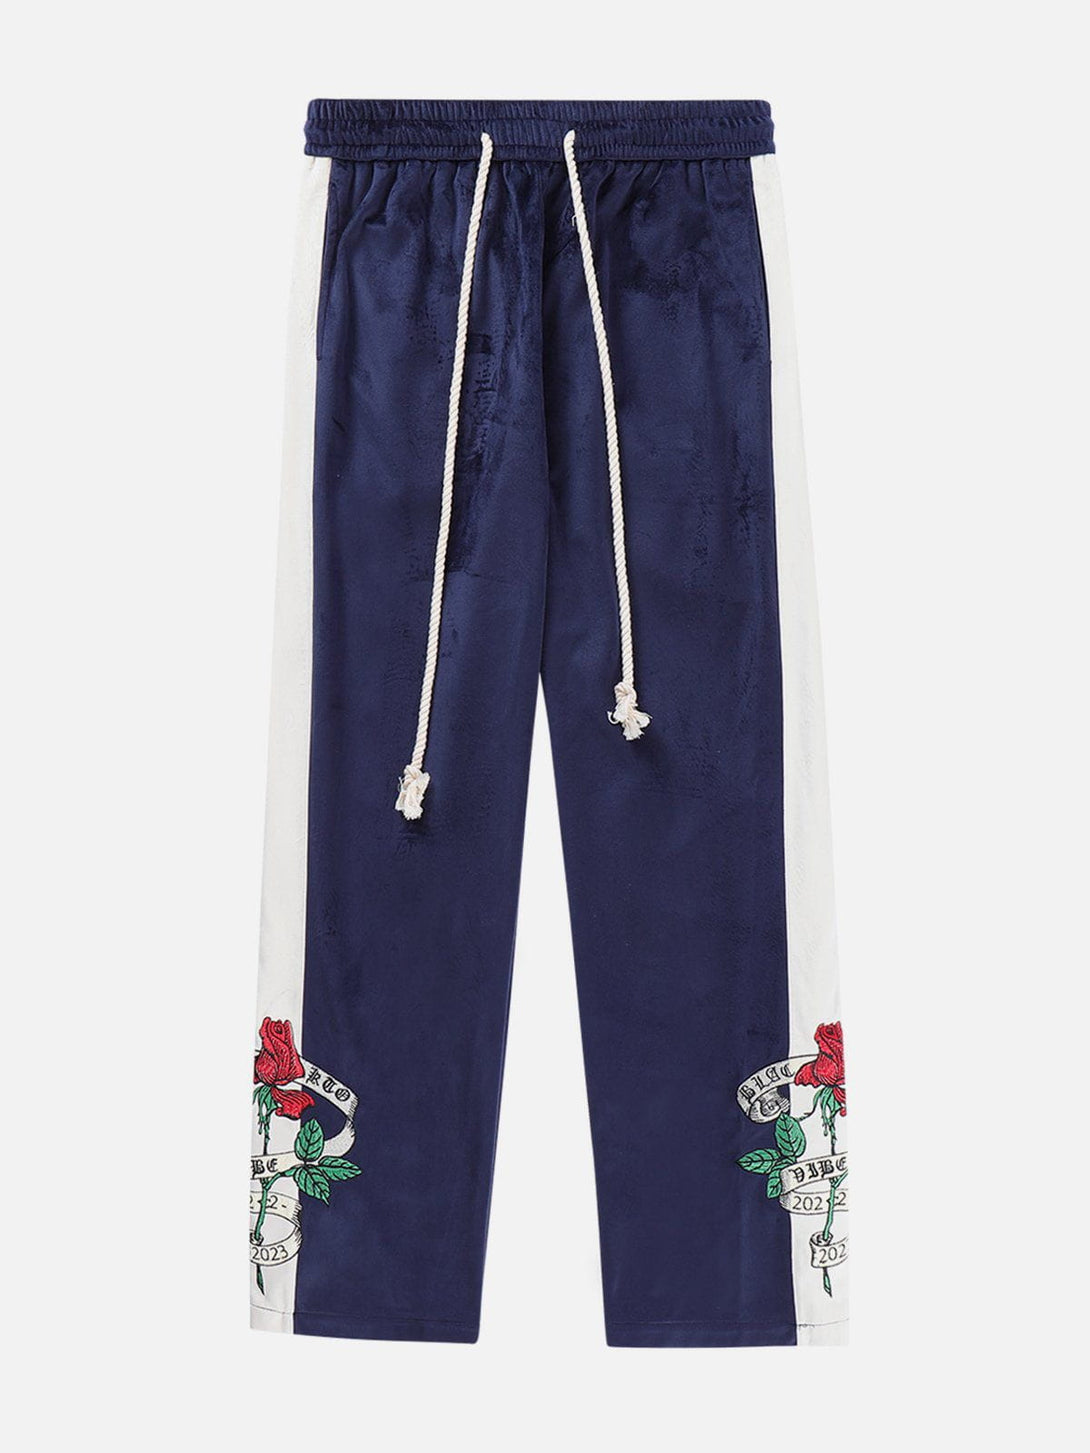 Majesda® - Embroidered Rose Drawstring Pants outfit ideas streetwear fashion